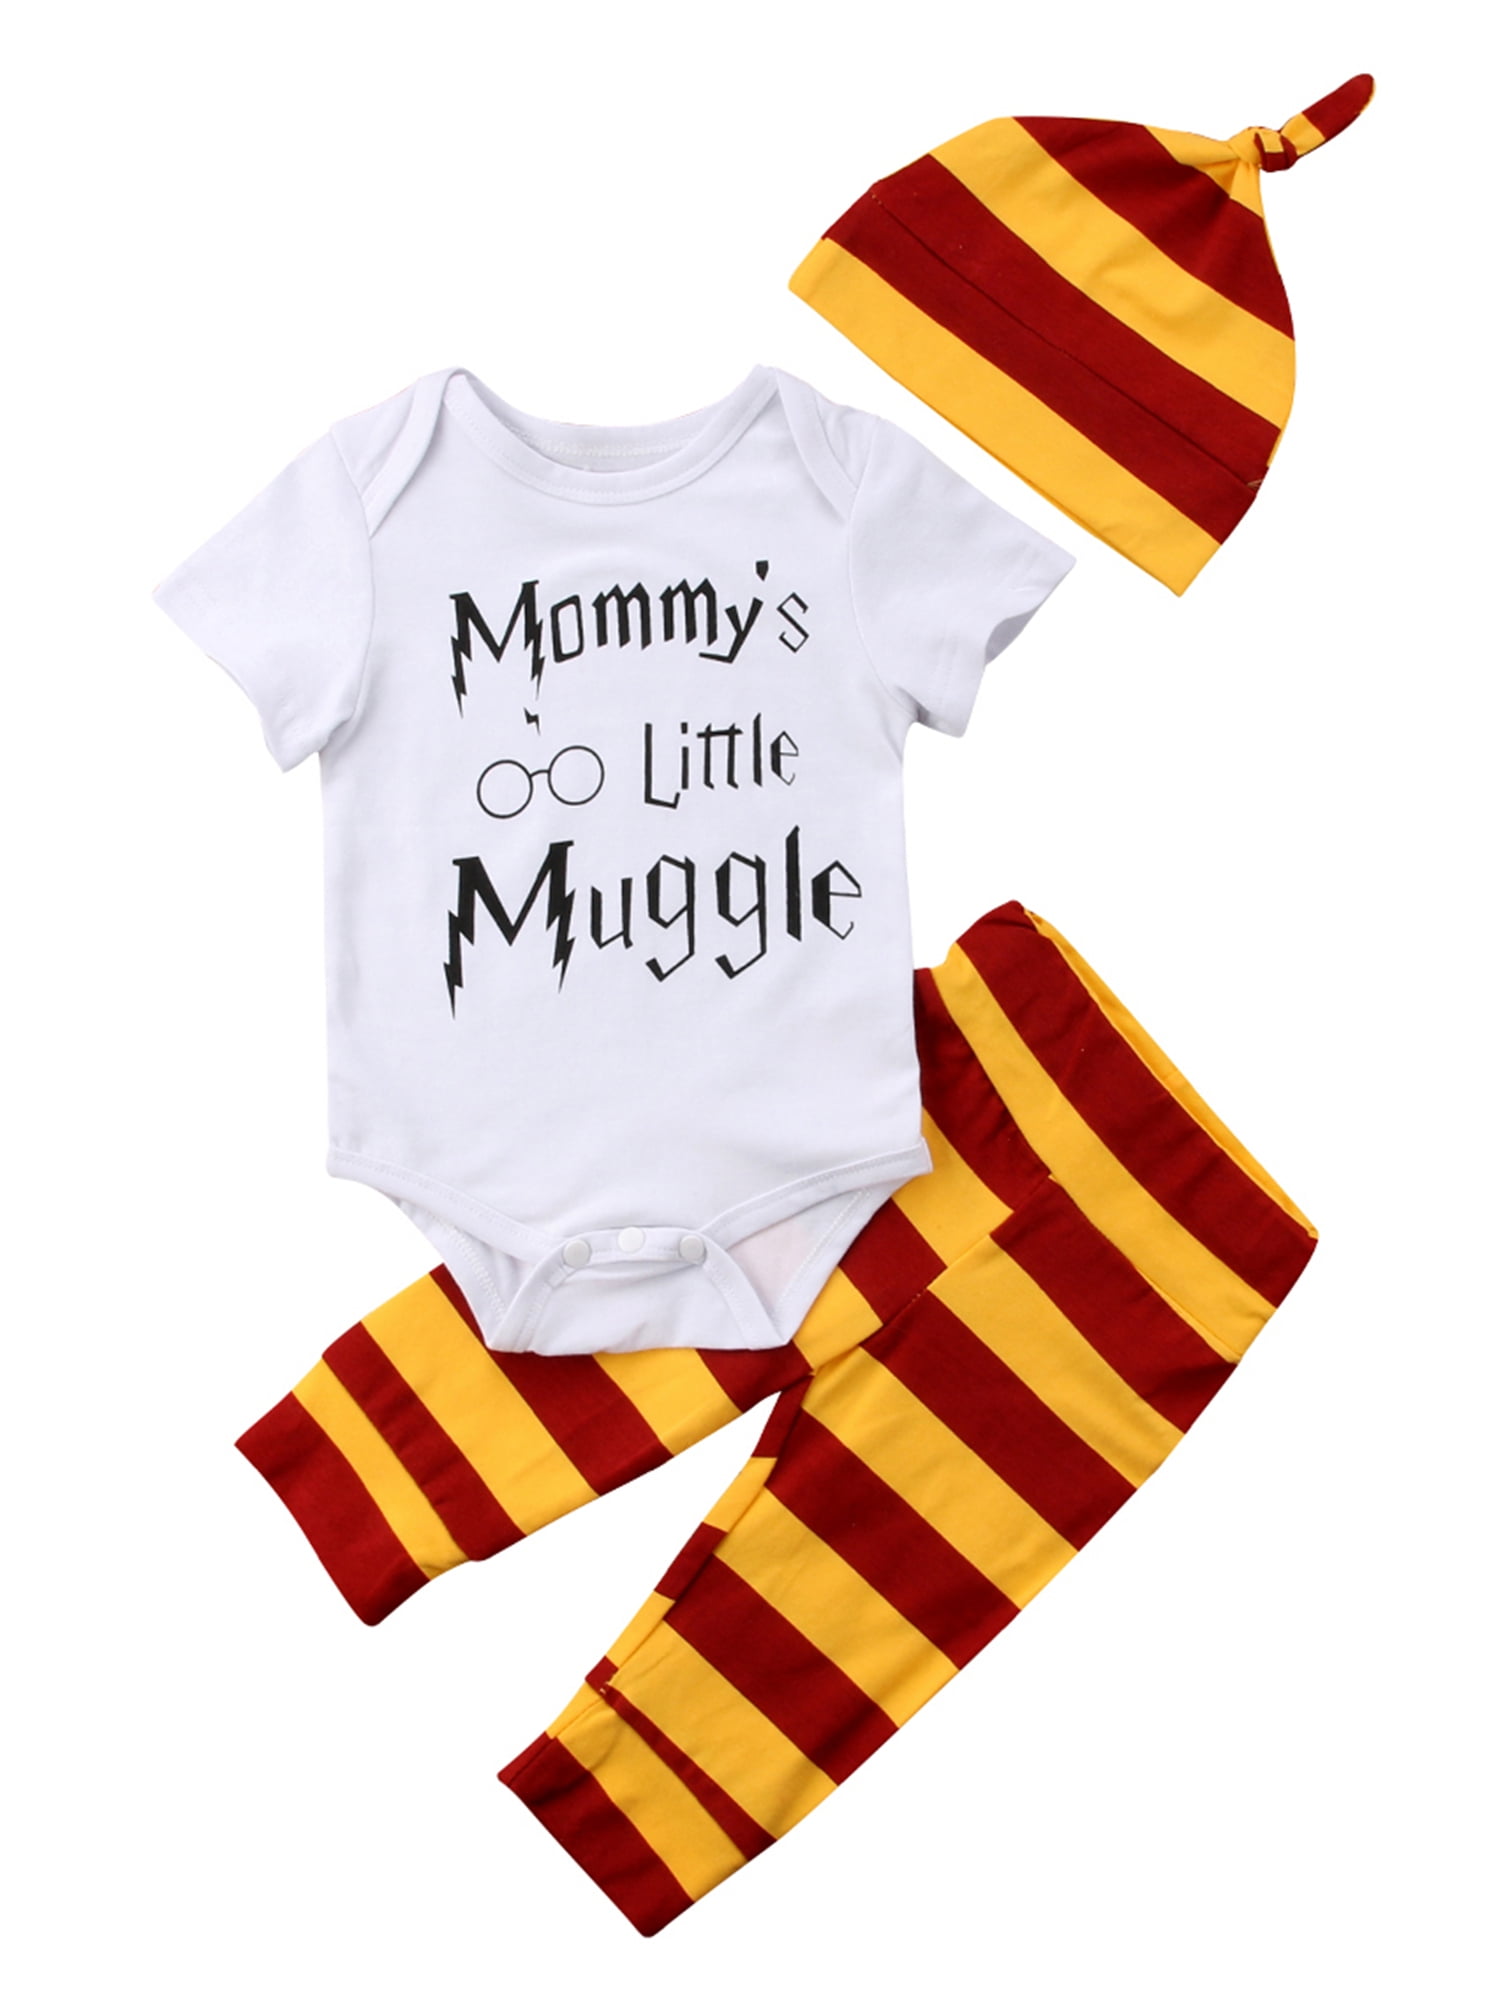 Baby Snuggle this Muggle Bodysuit and Striped Pants Outfit with Hat